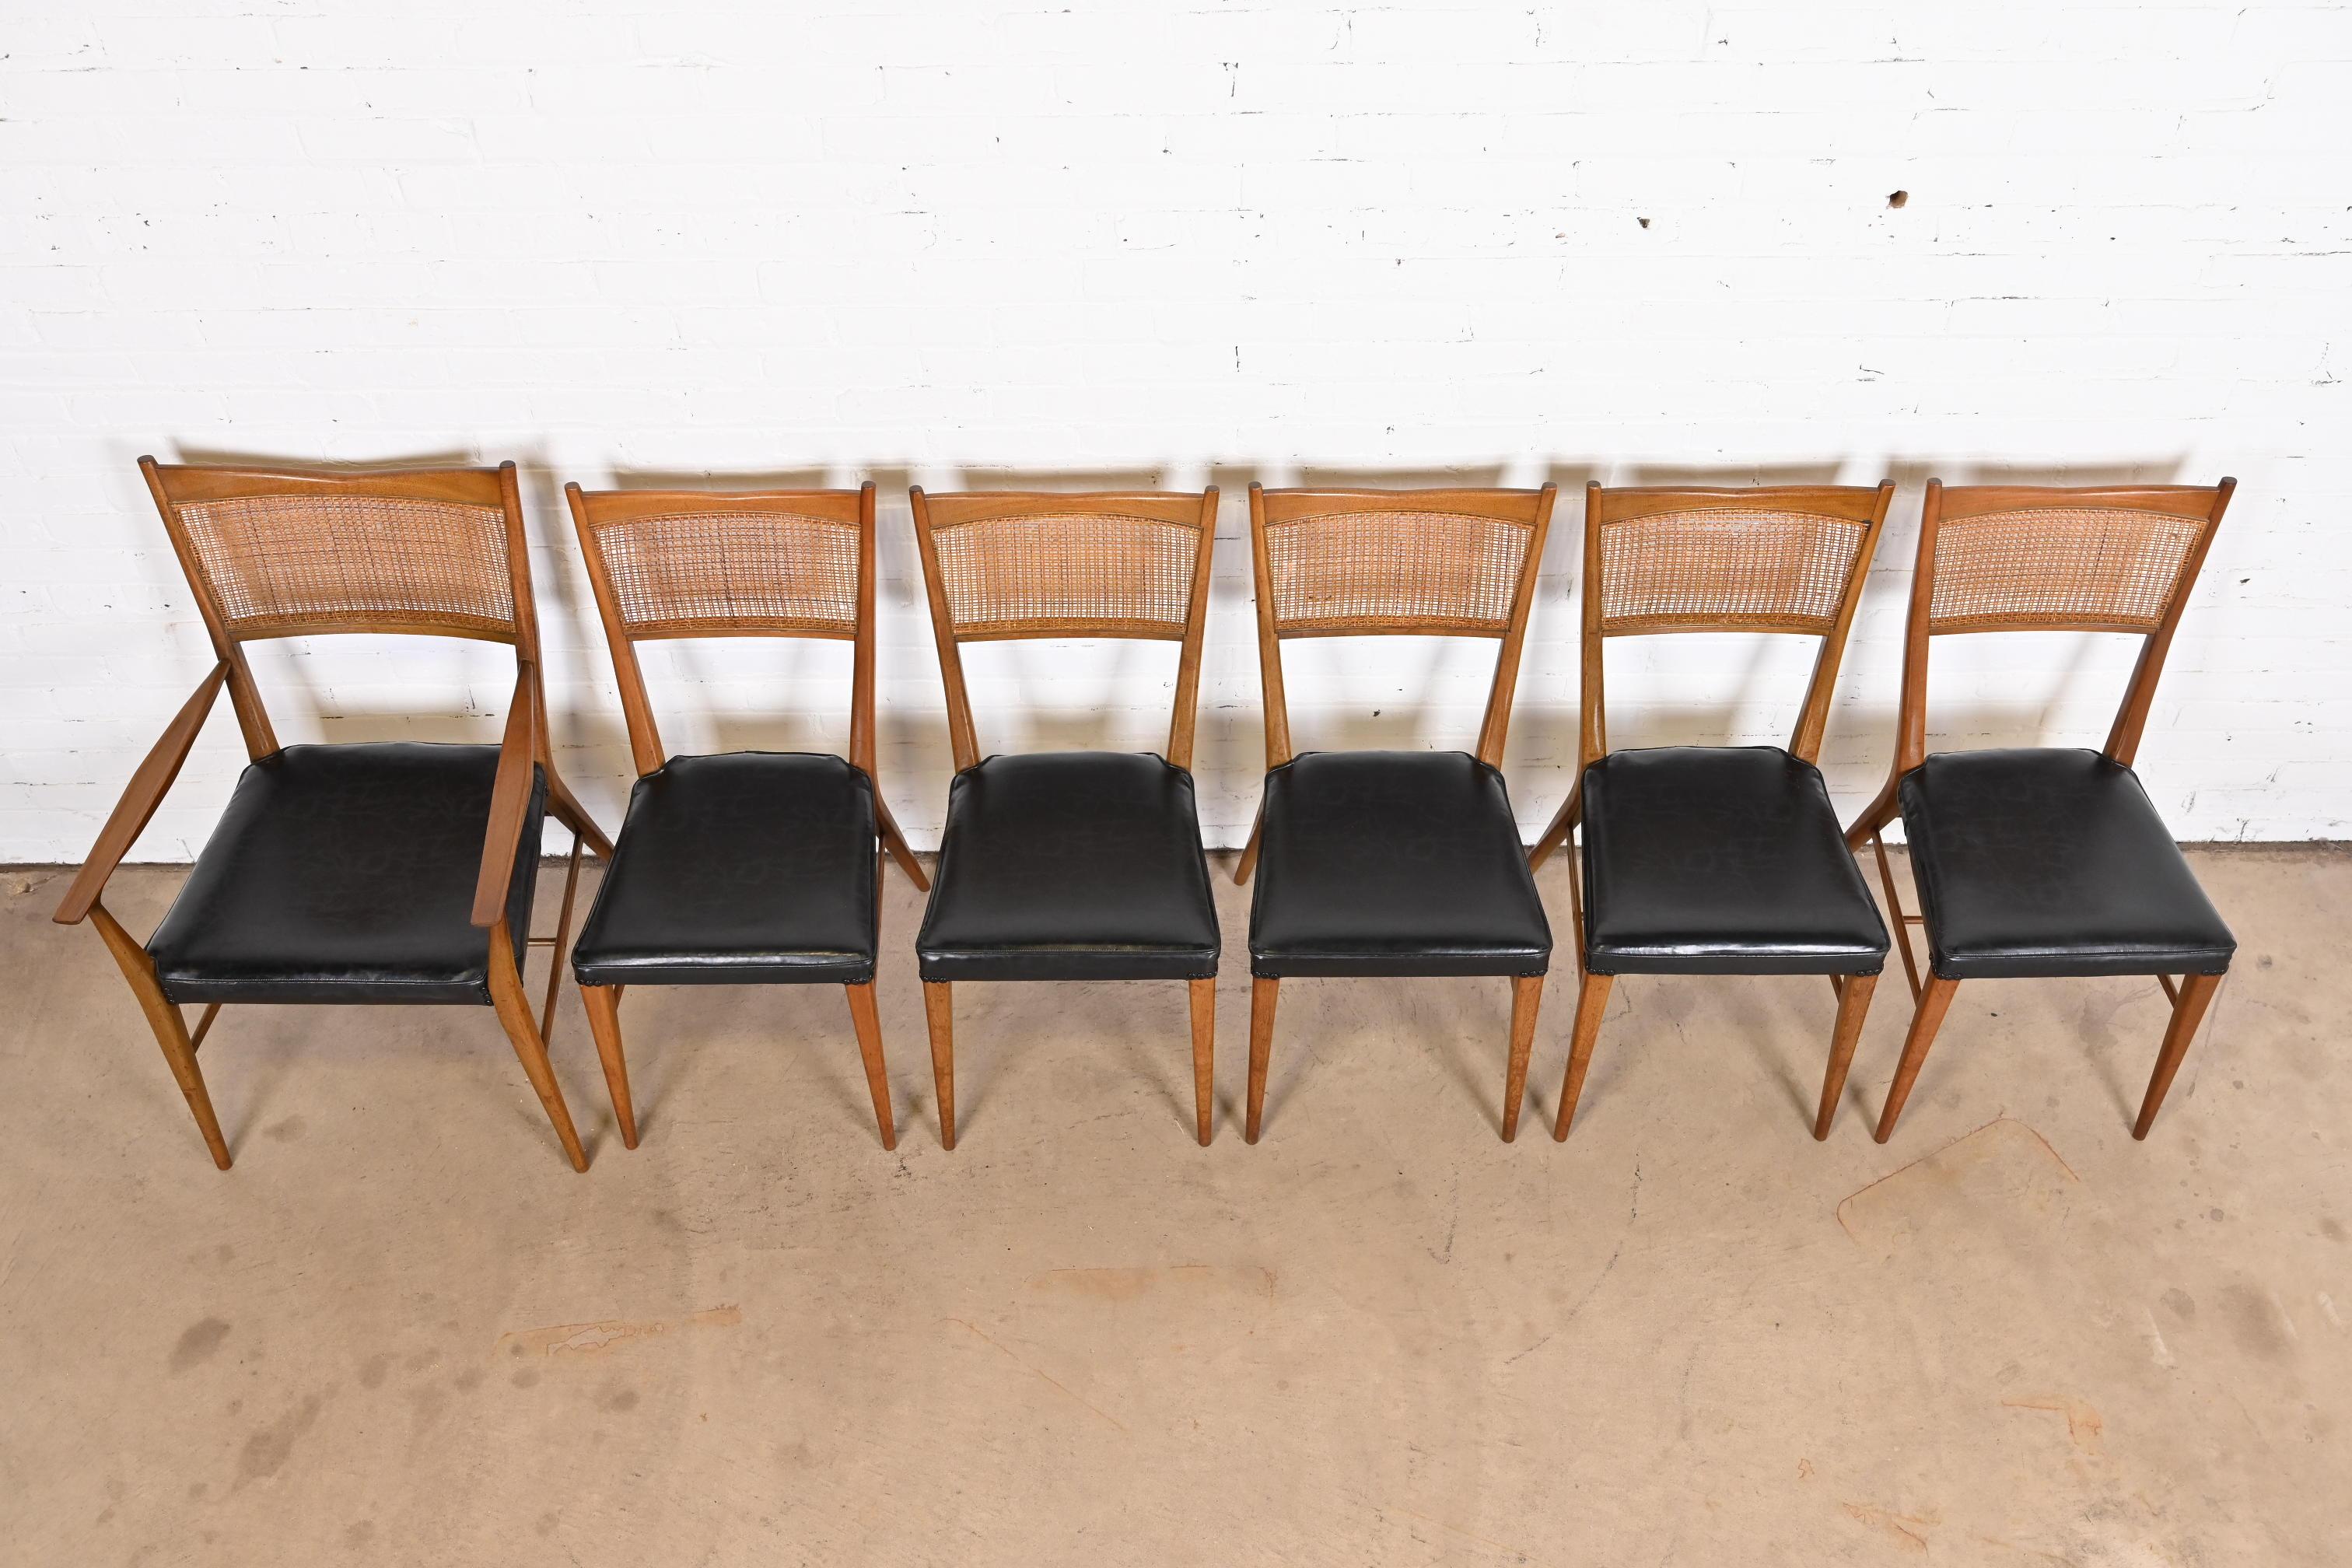 Mid-20th Century Paul McCobb Irwin Collection Sculpted Mahogany and Cane Dining Chairs, Set of 6